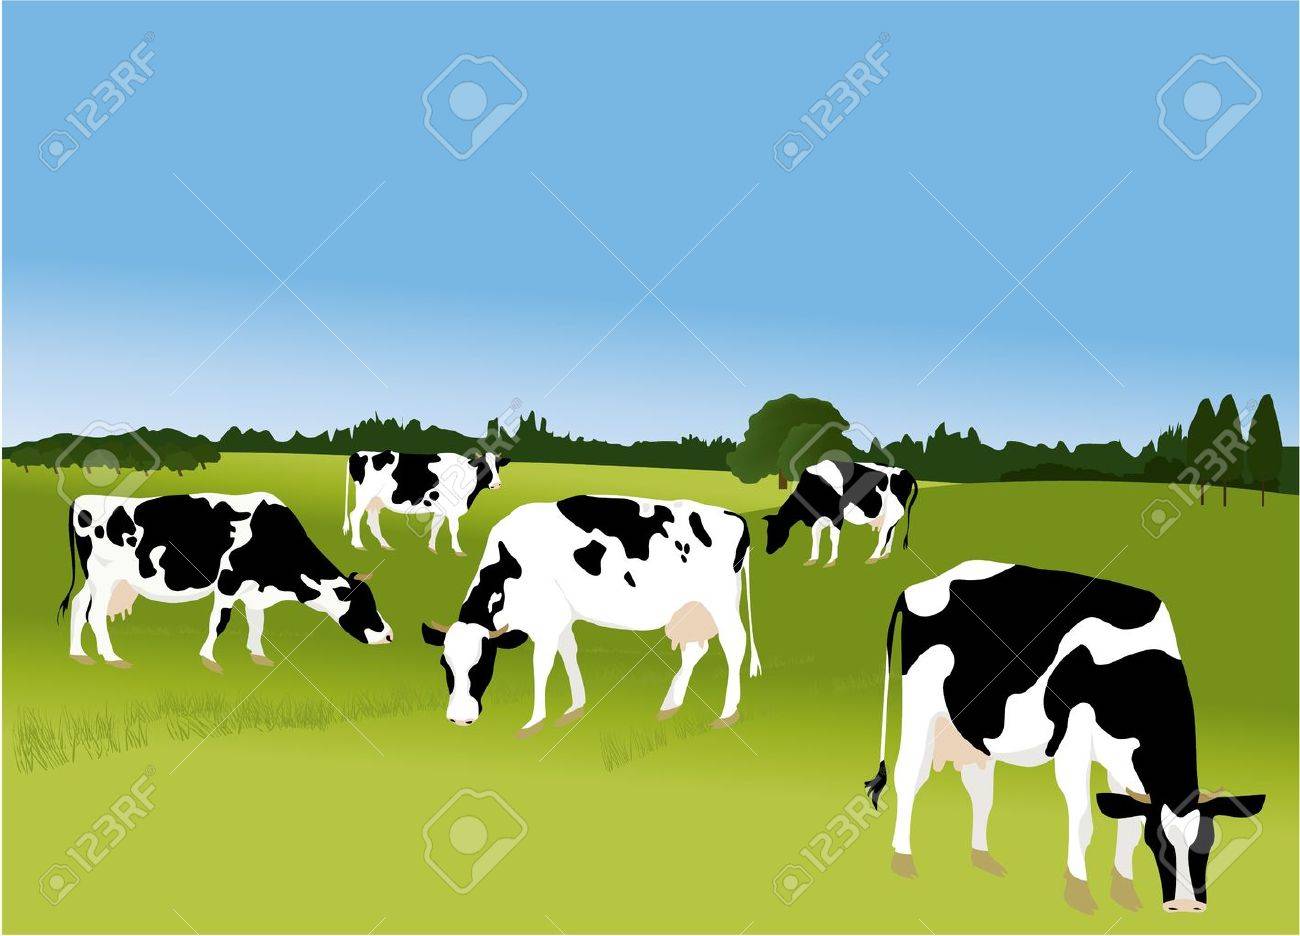 899 Cows free clipart.